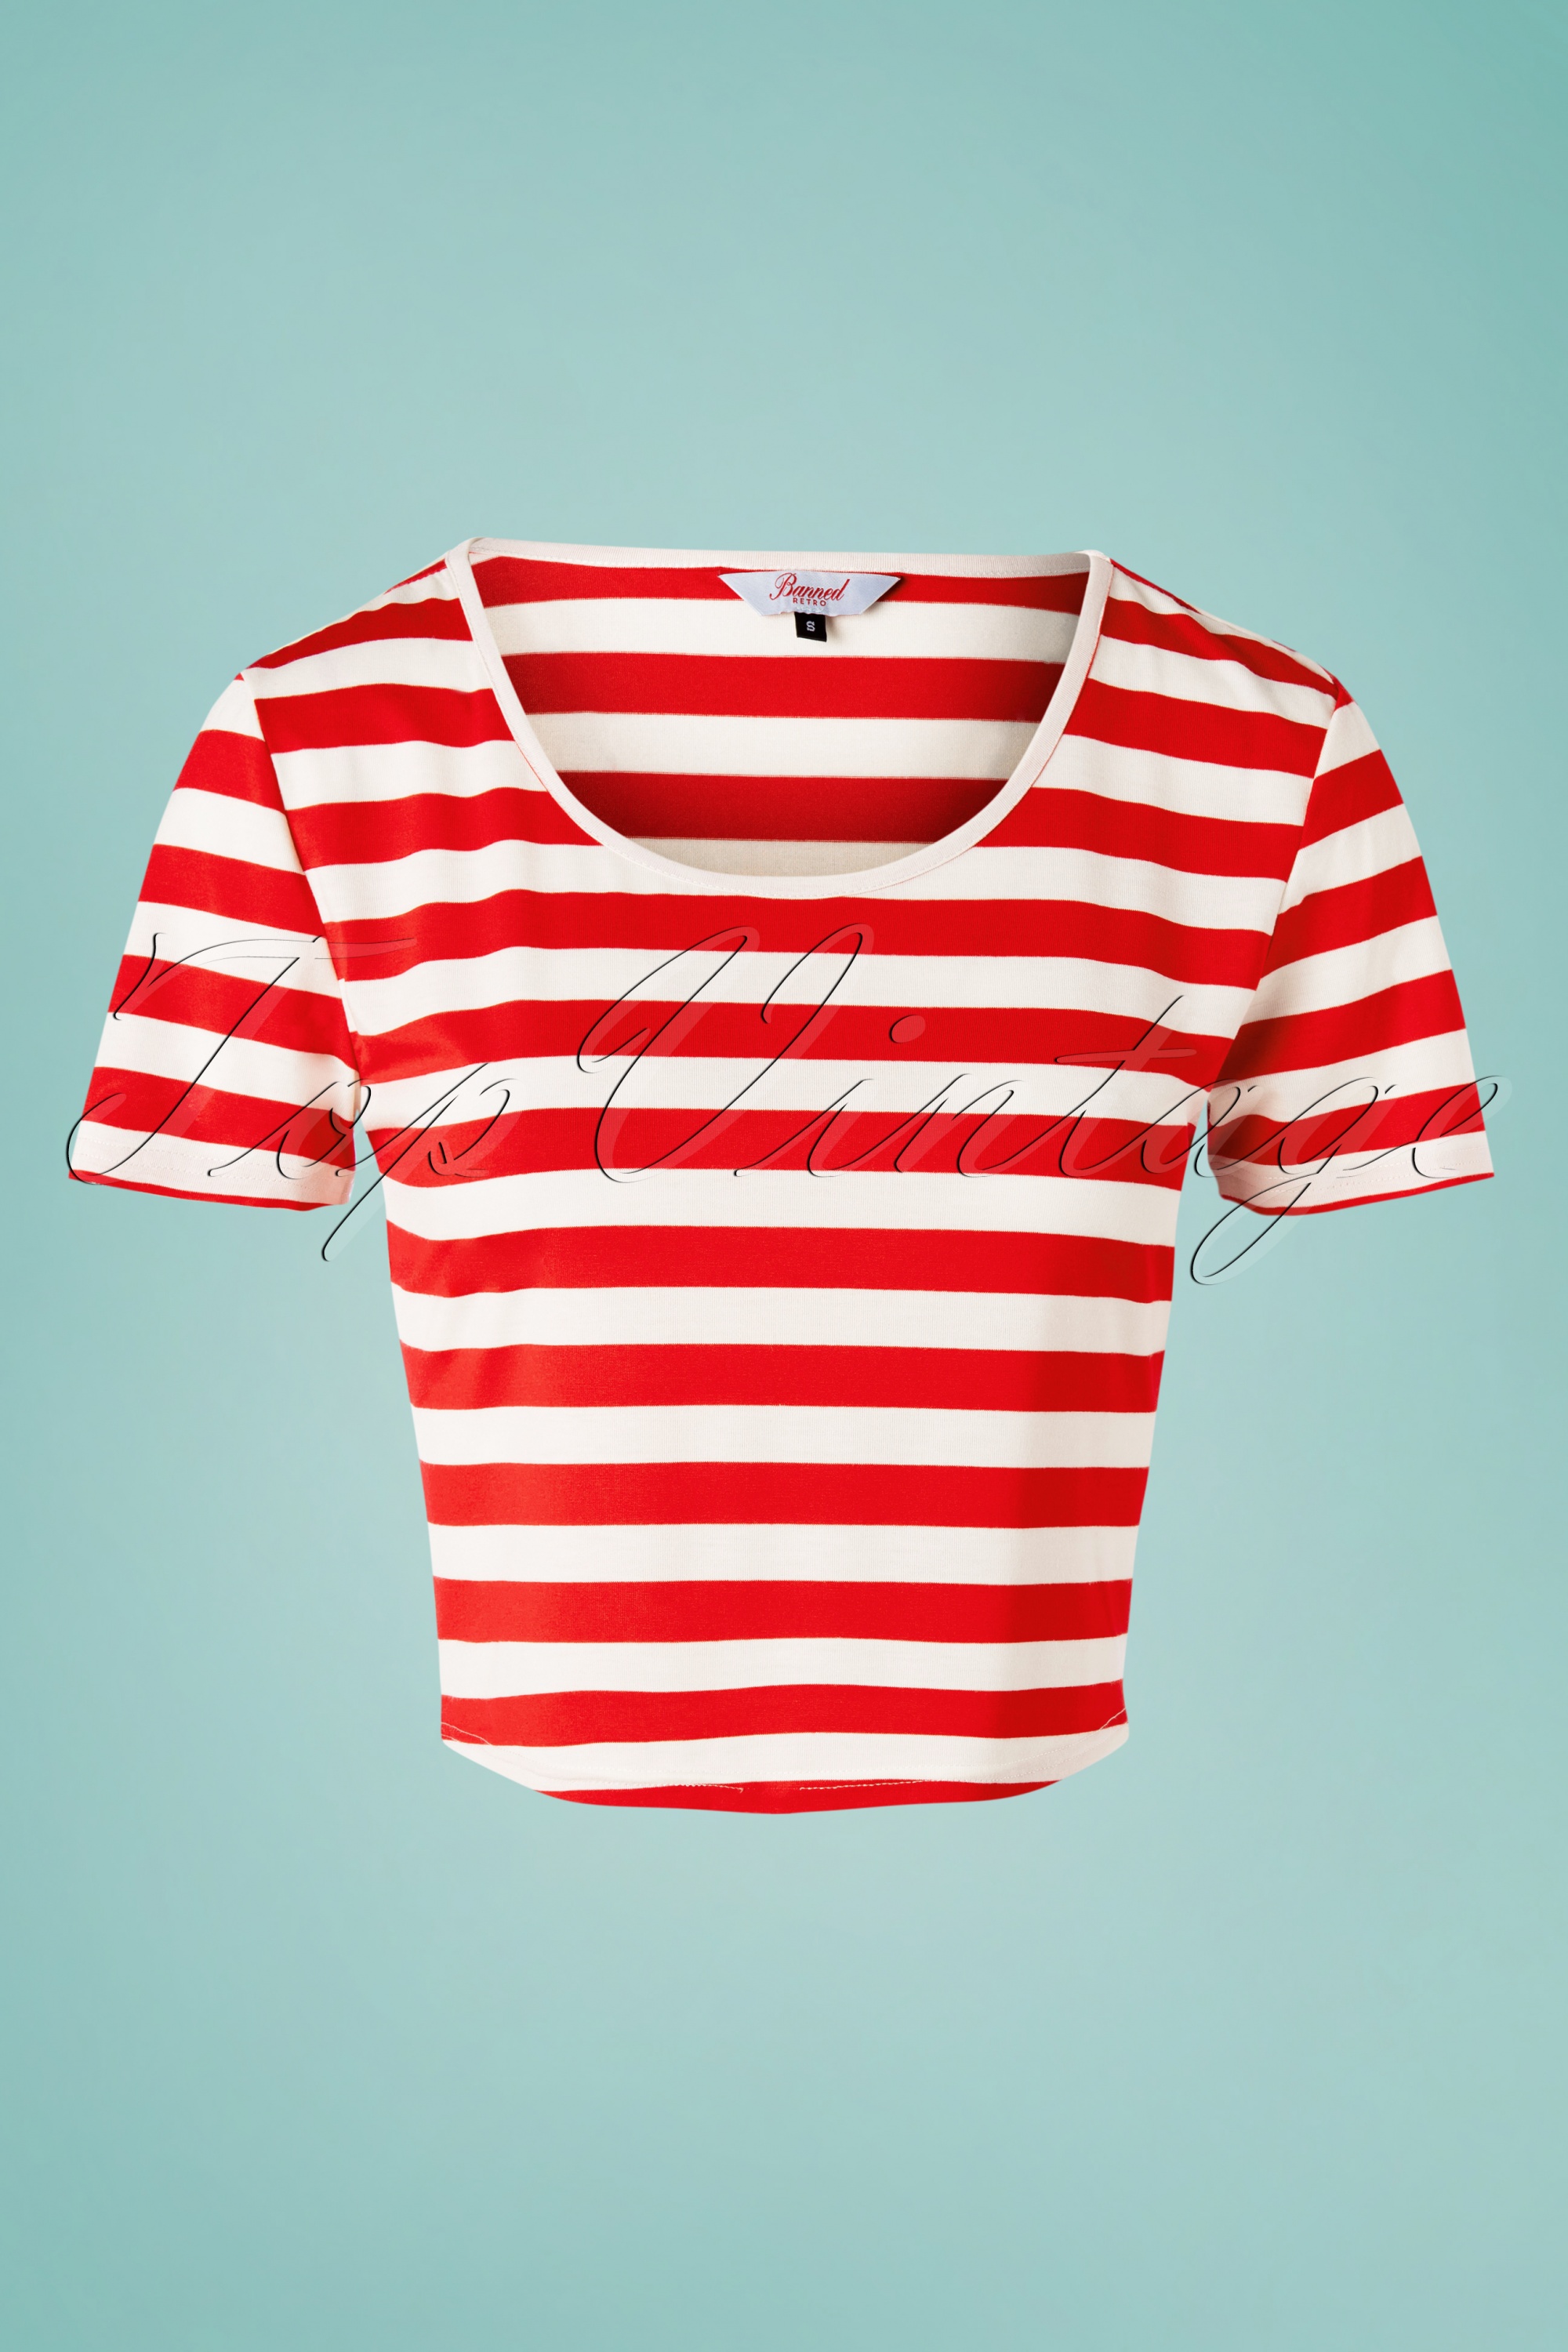 Banned Retro - Land Ahoy crop t-shirt in rood en wit 2